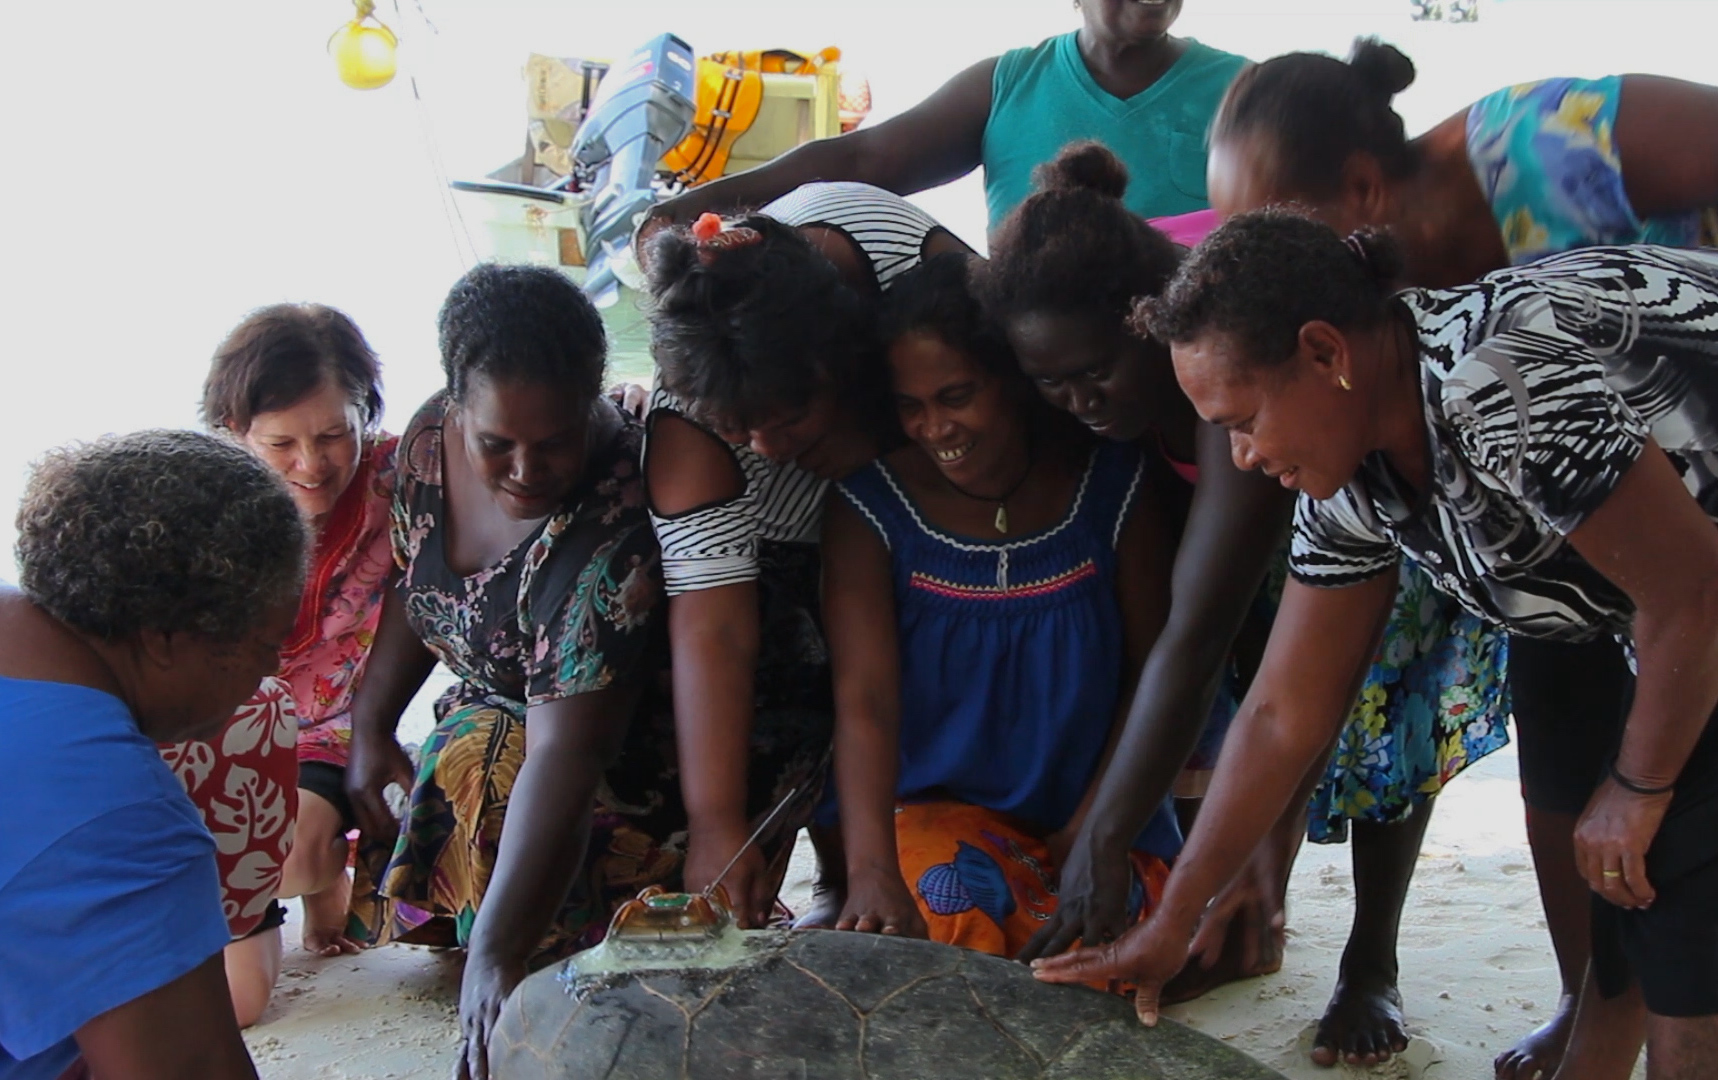 The women say farewell to the turtle named Mama KAWAKI in their honor. Photo © The Nature Conservancy (Justine E. Hausheer) 